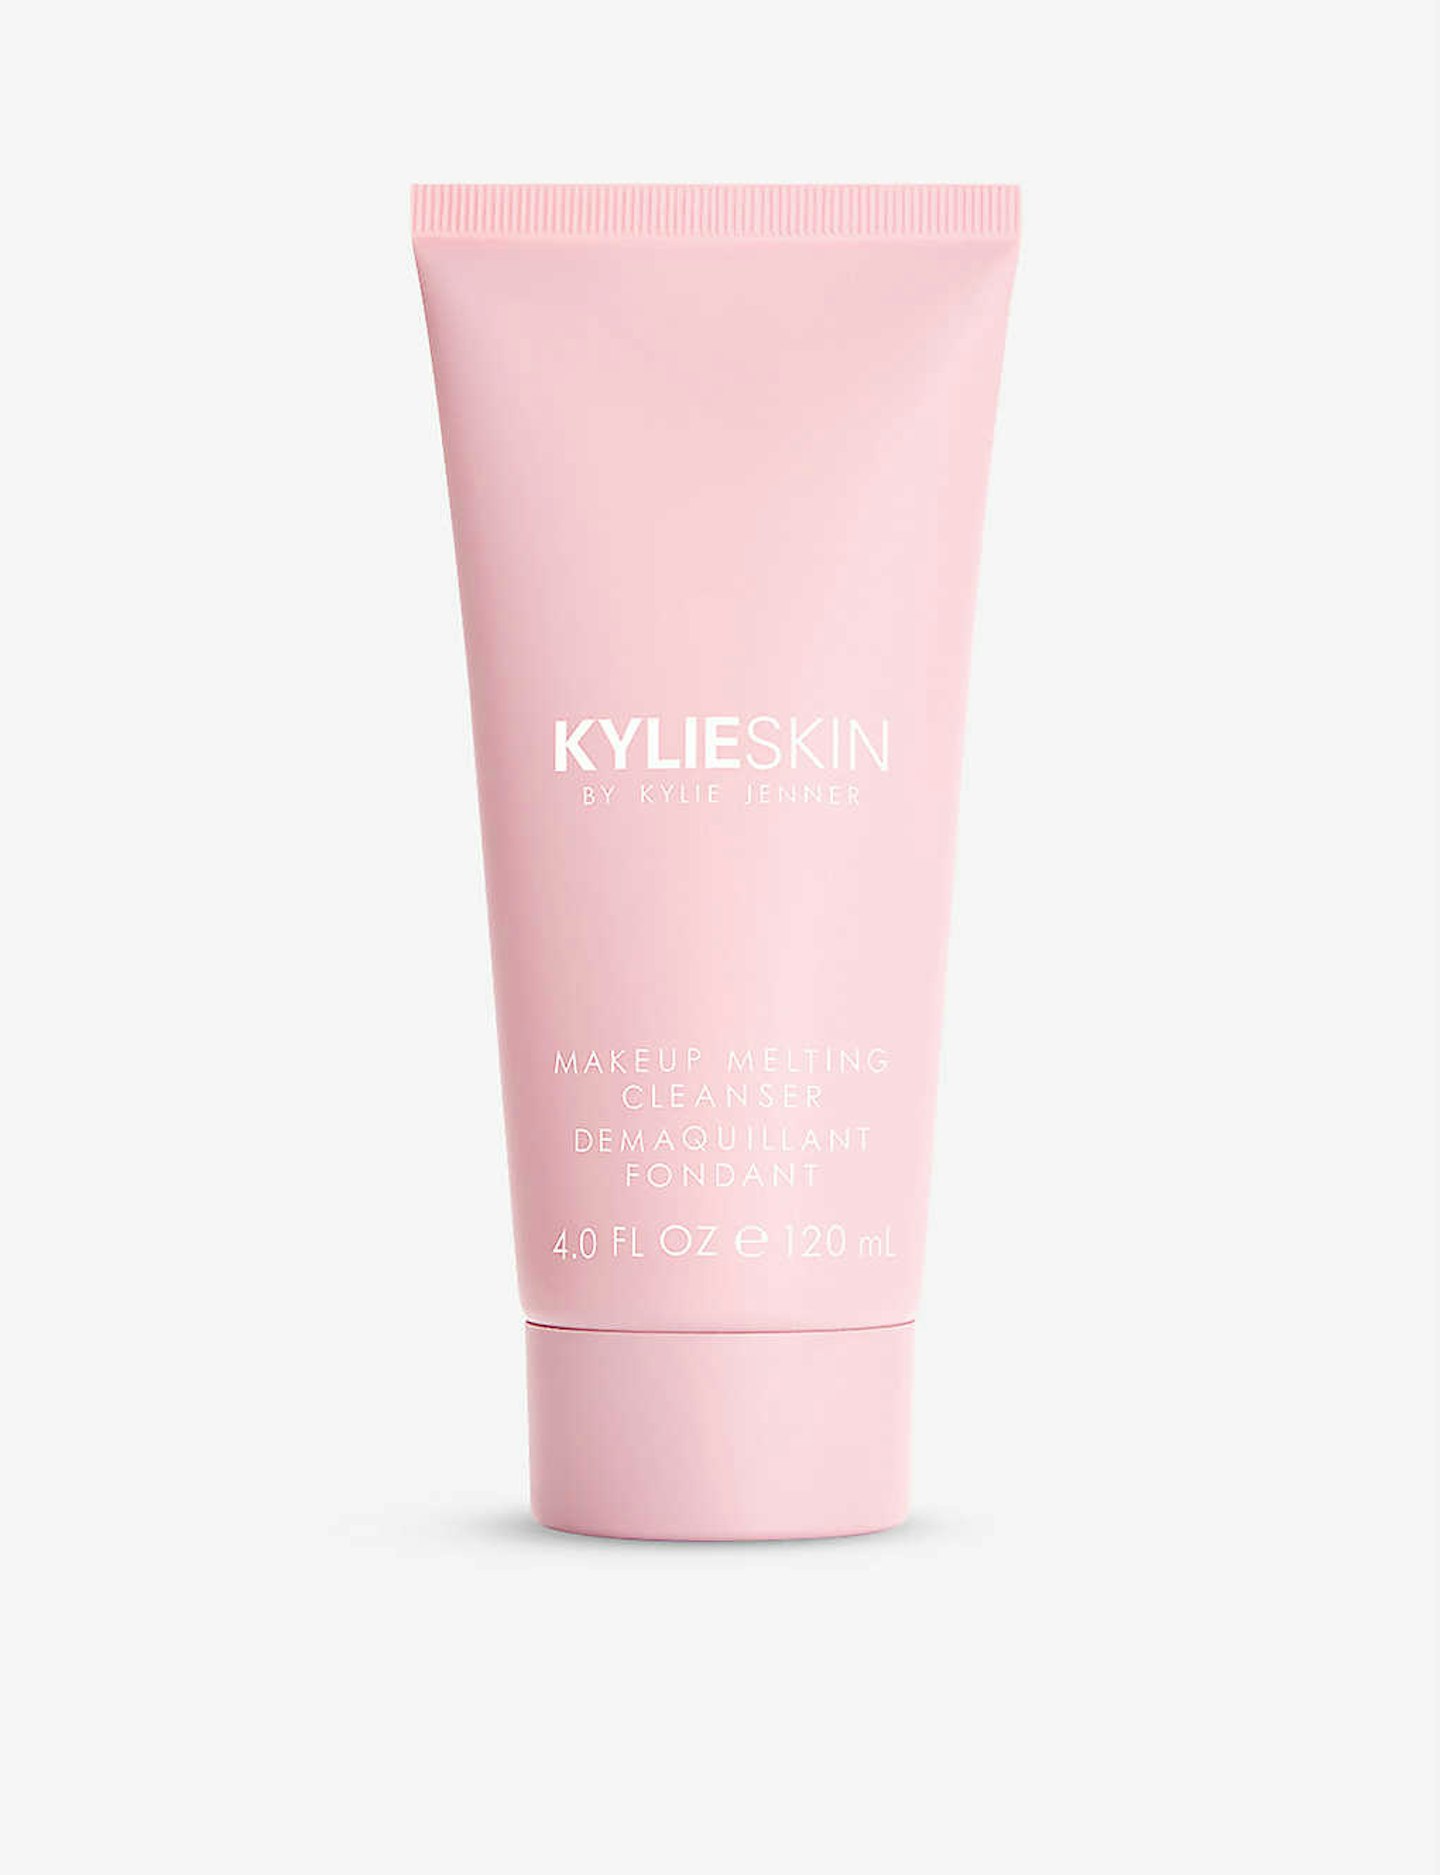 Kylie Jenner evening skincare routine